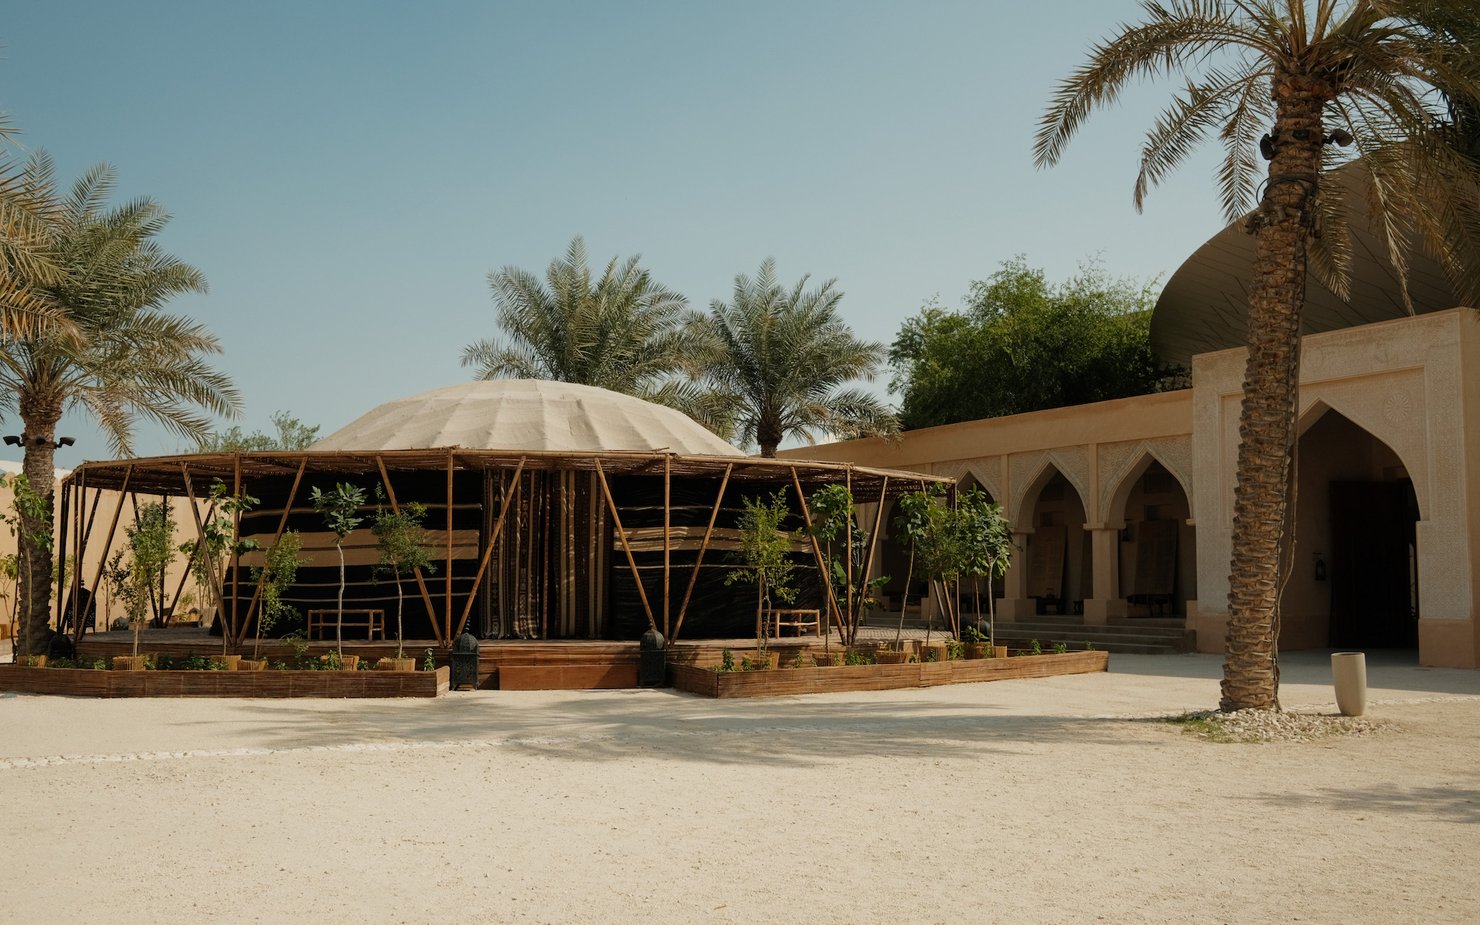 A tent-like structure with bamboo poles holding the perimeter sits in the middle of a courtyard flanked by palm trees.